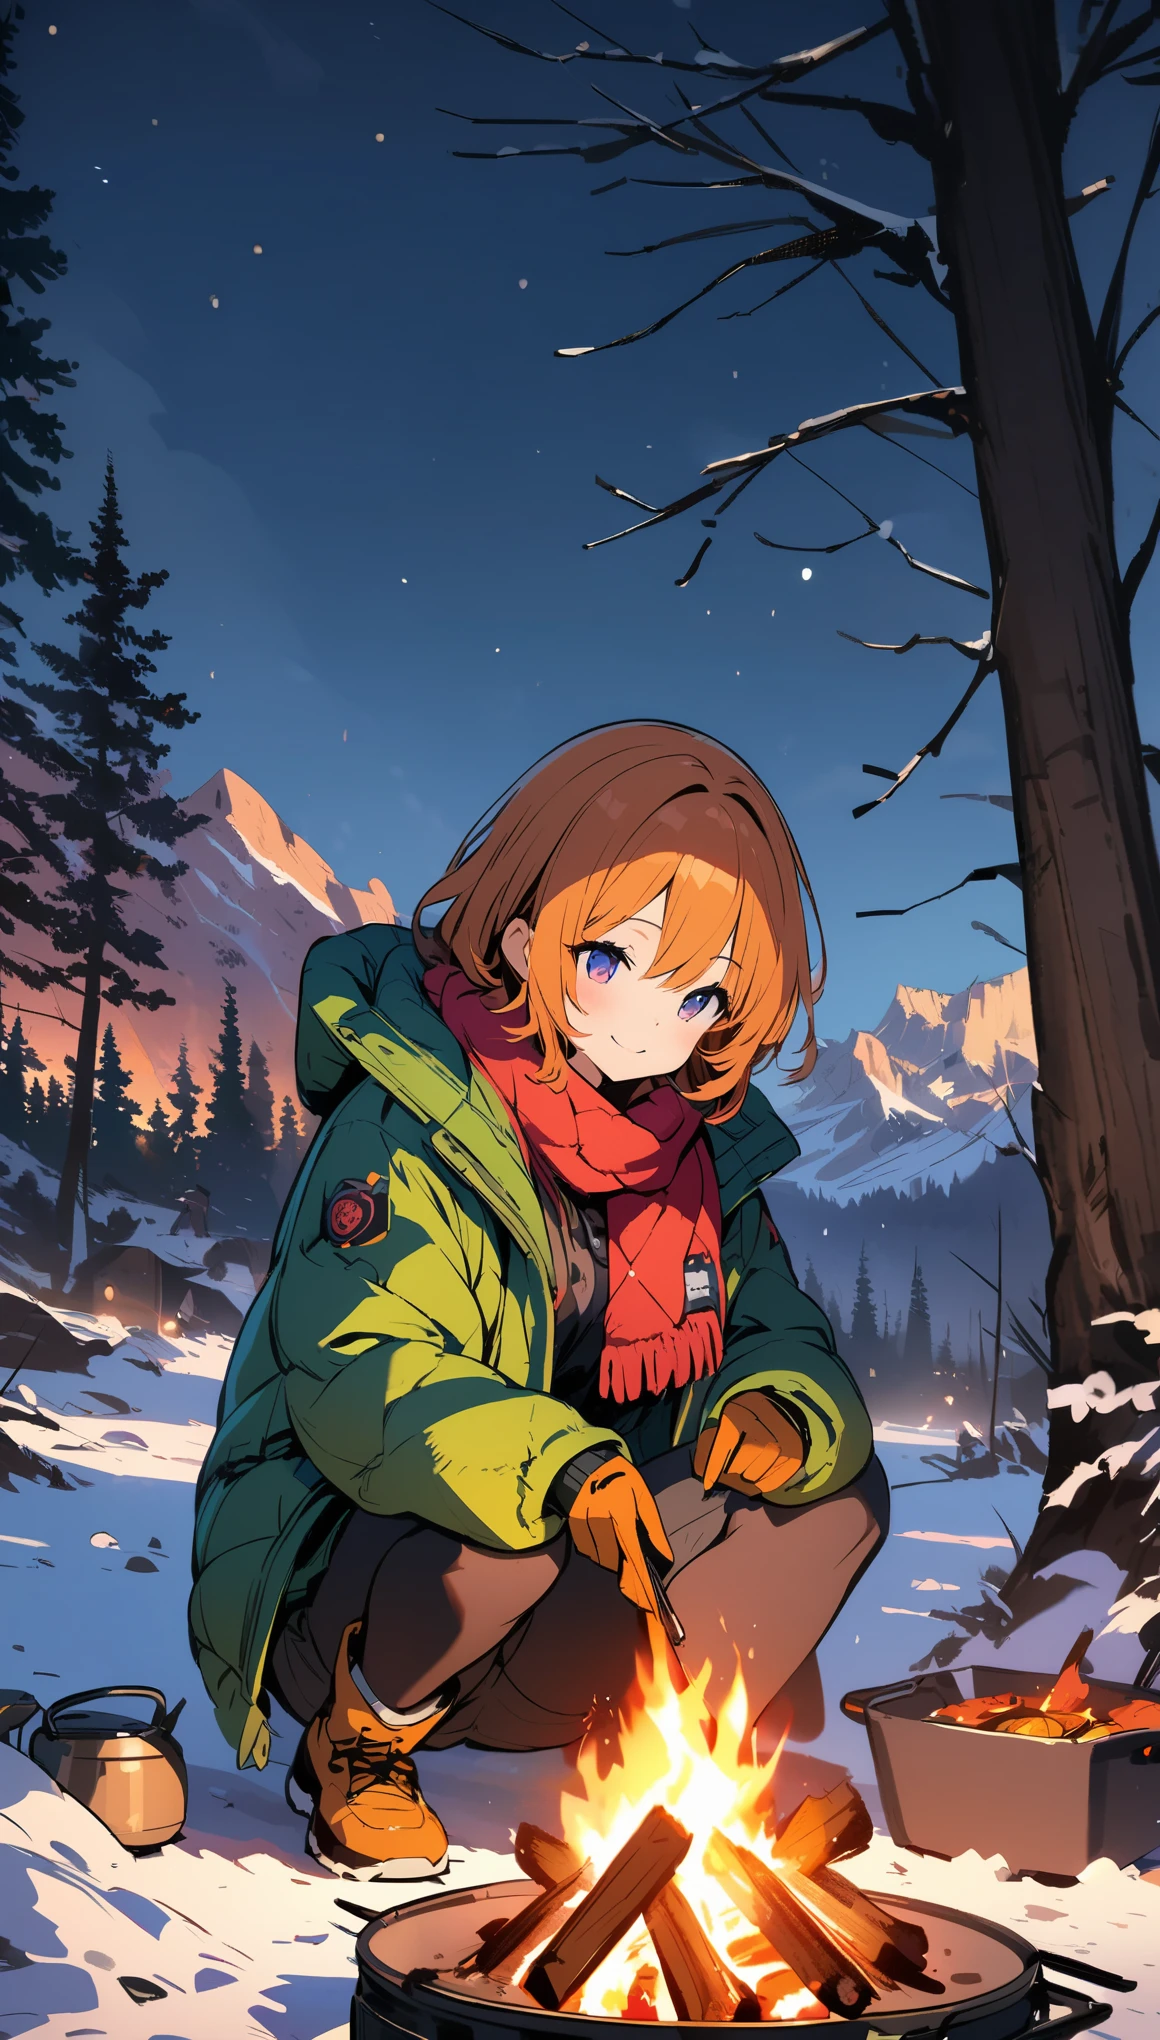 masterpiece, highly detailed, concept art, oil painting, gouache, hard brush 1girl, orange hair, cute smile, sitting, wearing down jacket, scarf, glove, camping, campfire, grilling fish, near the river, snowy, night, HD